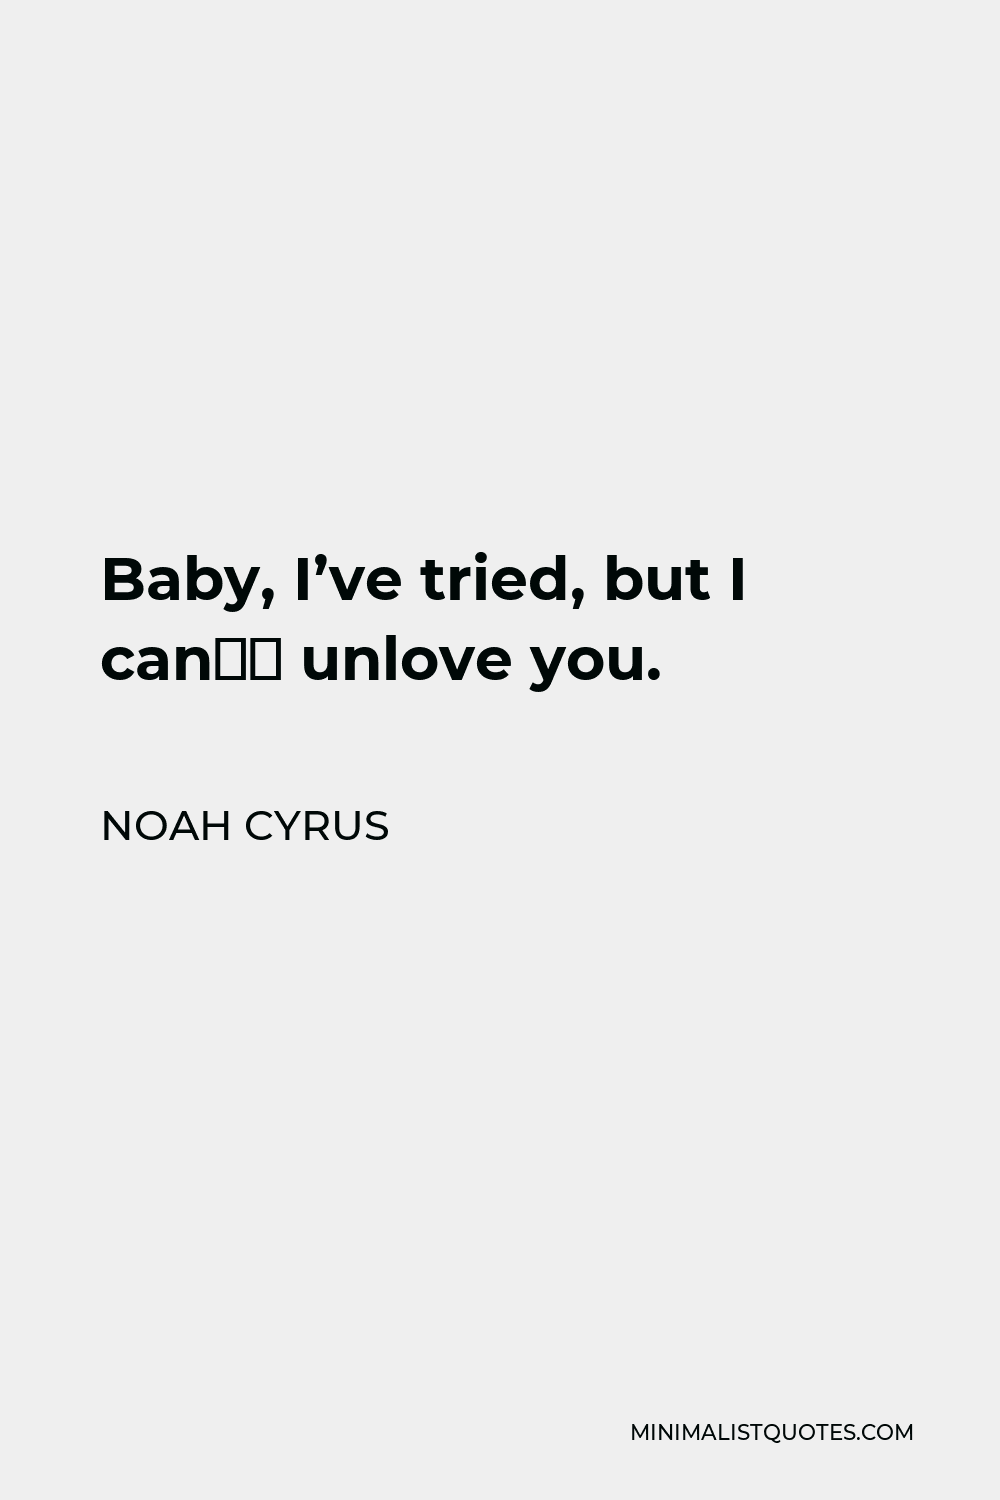 Noah Cyrus Quote - Baby, I’ve tried, but I can’t unlove you.